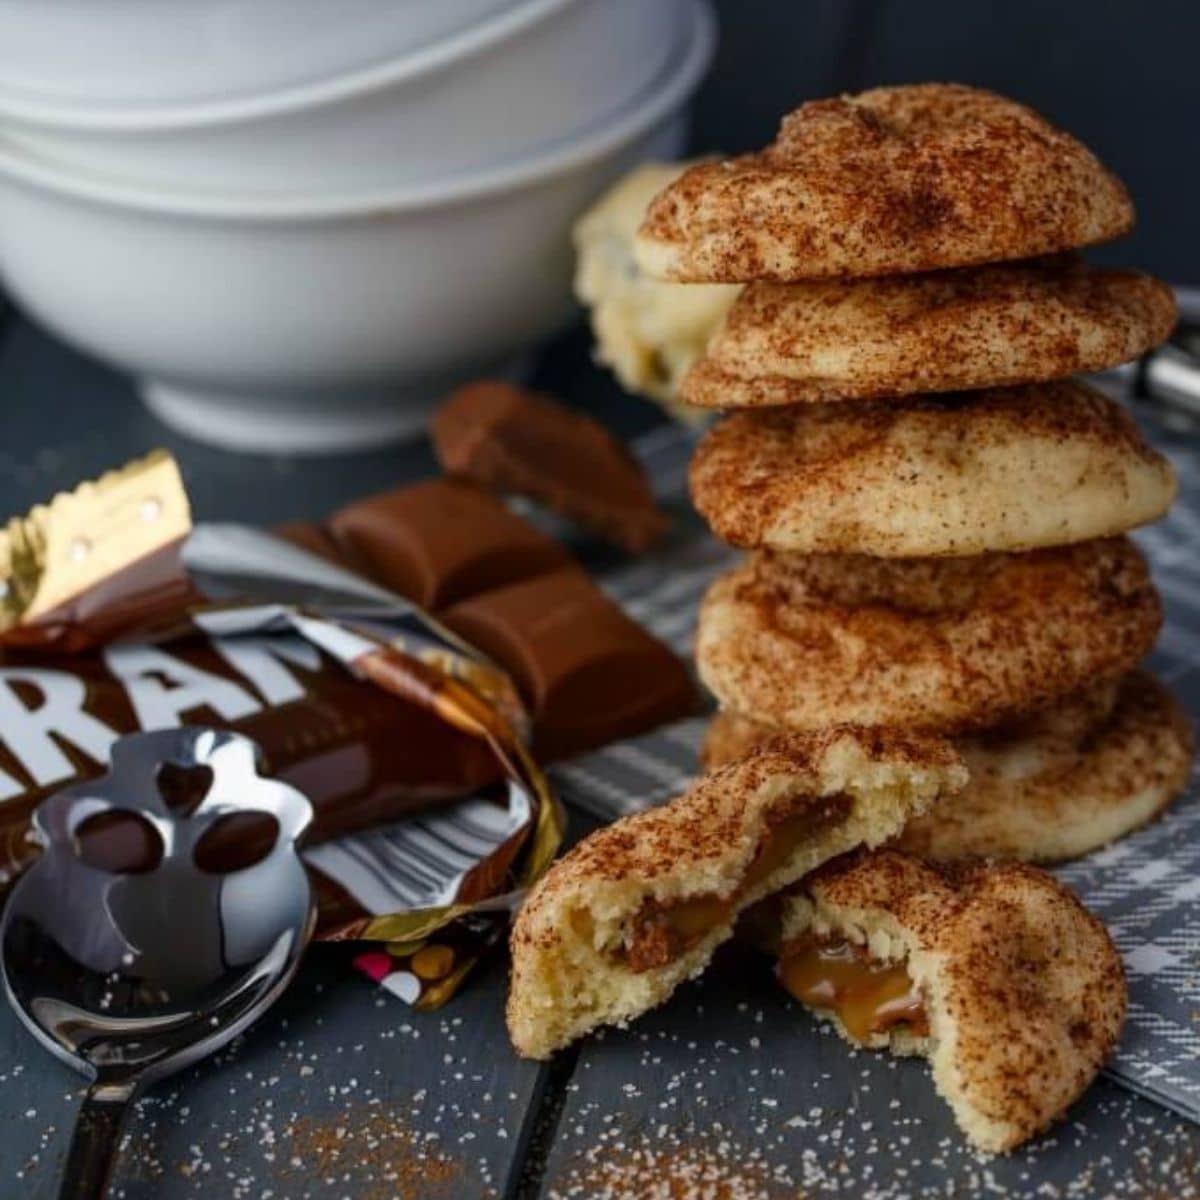 Caramilk stuffed snickerdoodles with spoon, candy and white bowls on brown table